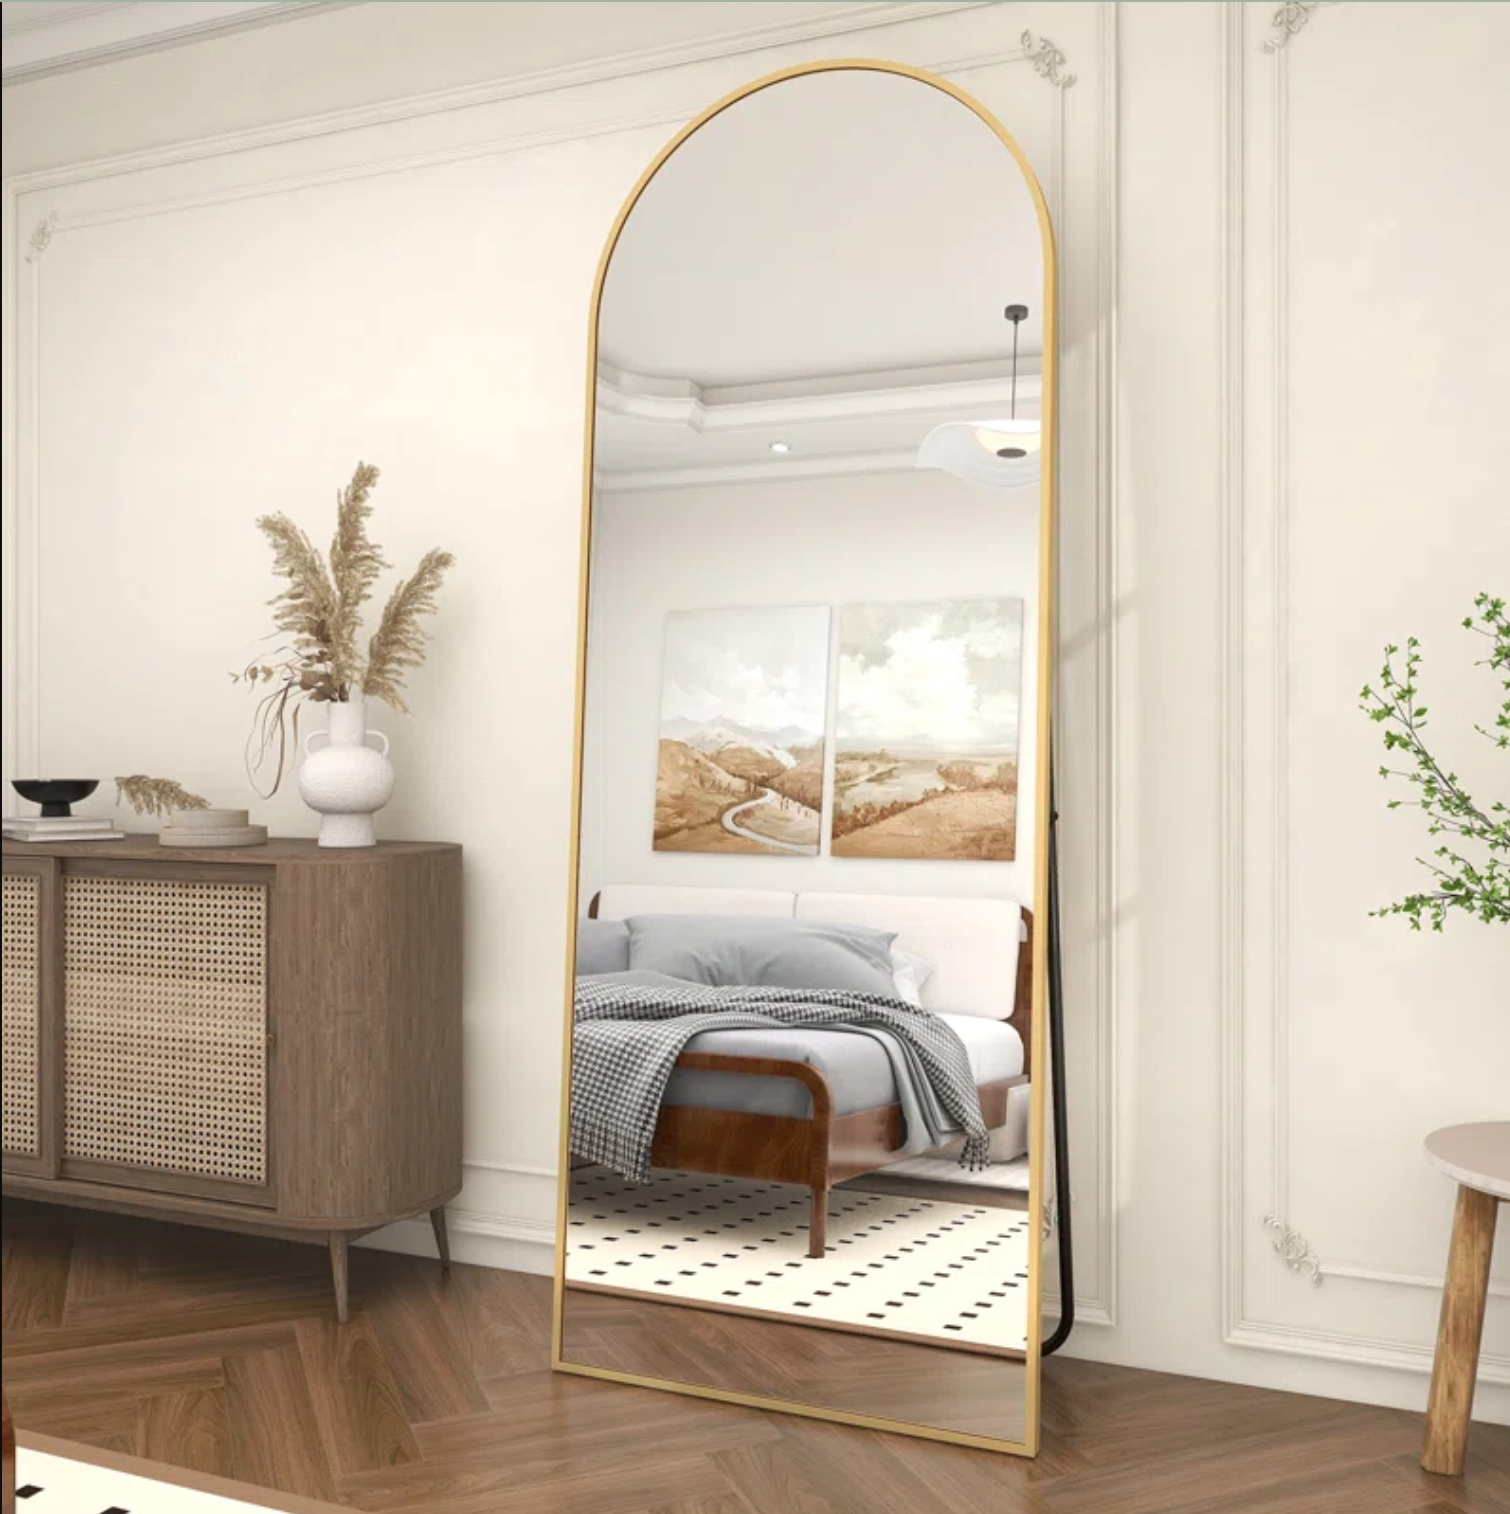 A arch-shaped mirror with a golden frame